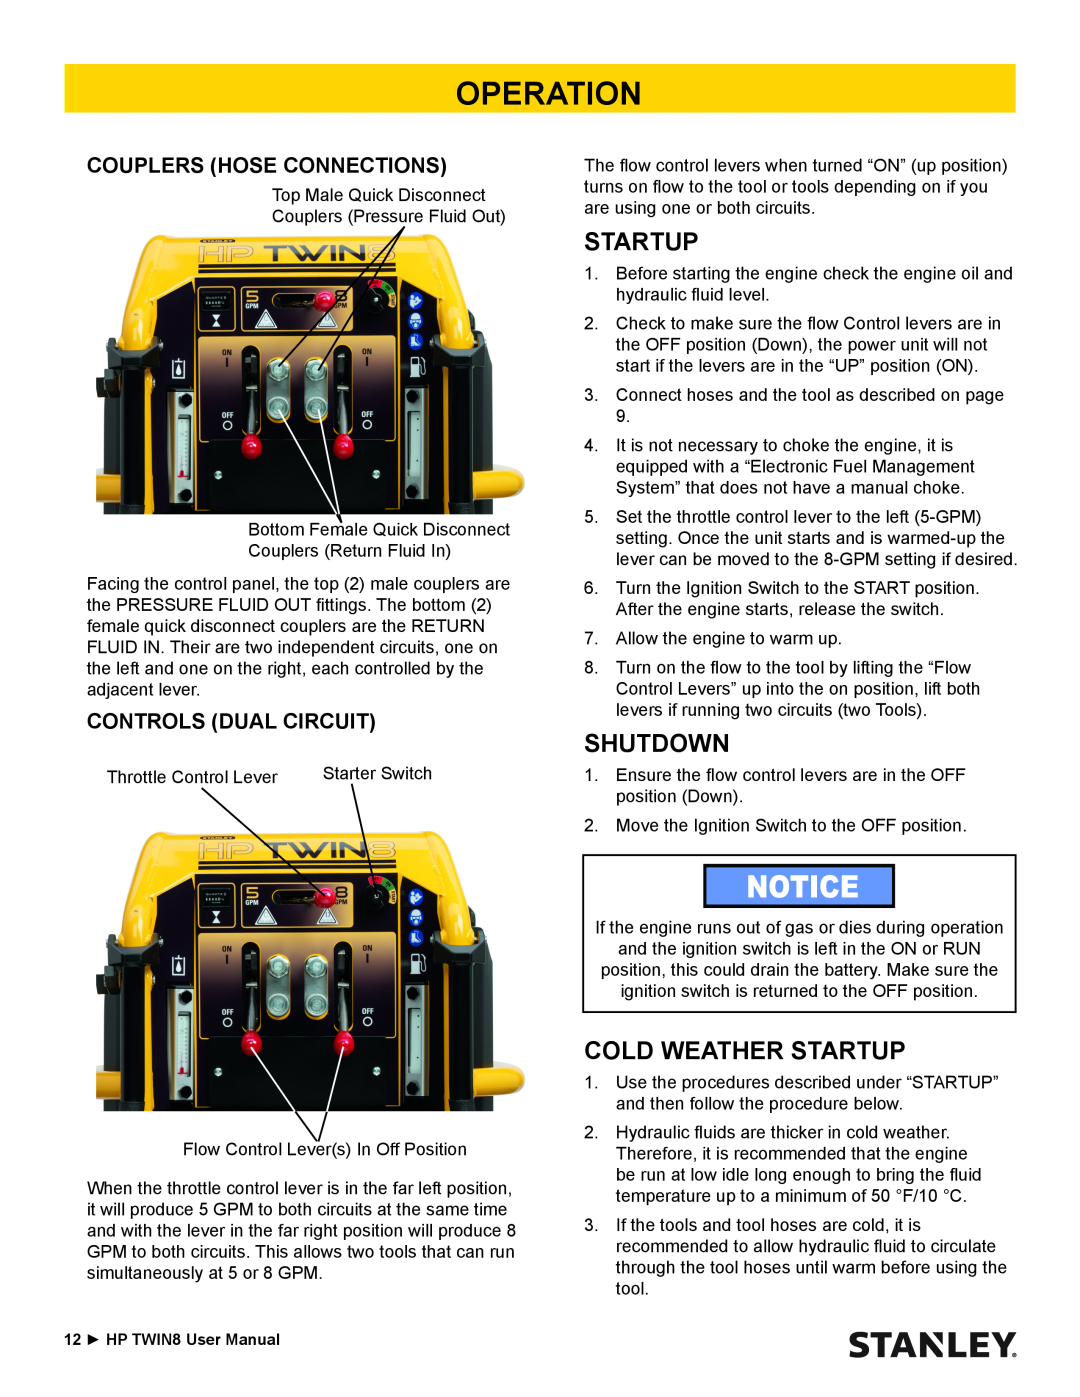 Stanley Black & Decker HP TWIN8 manual Operation, Shutdown, Cold Weather Startup, Couplers Hose Connections 